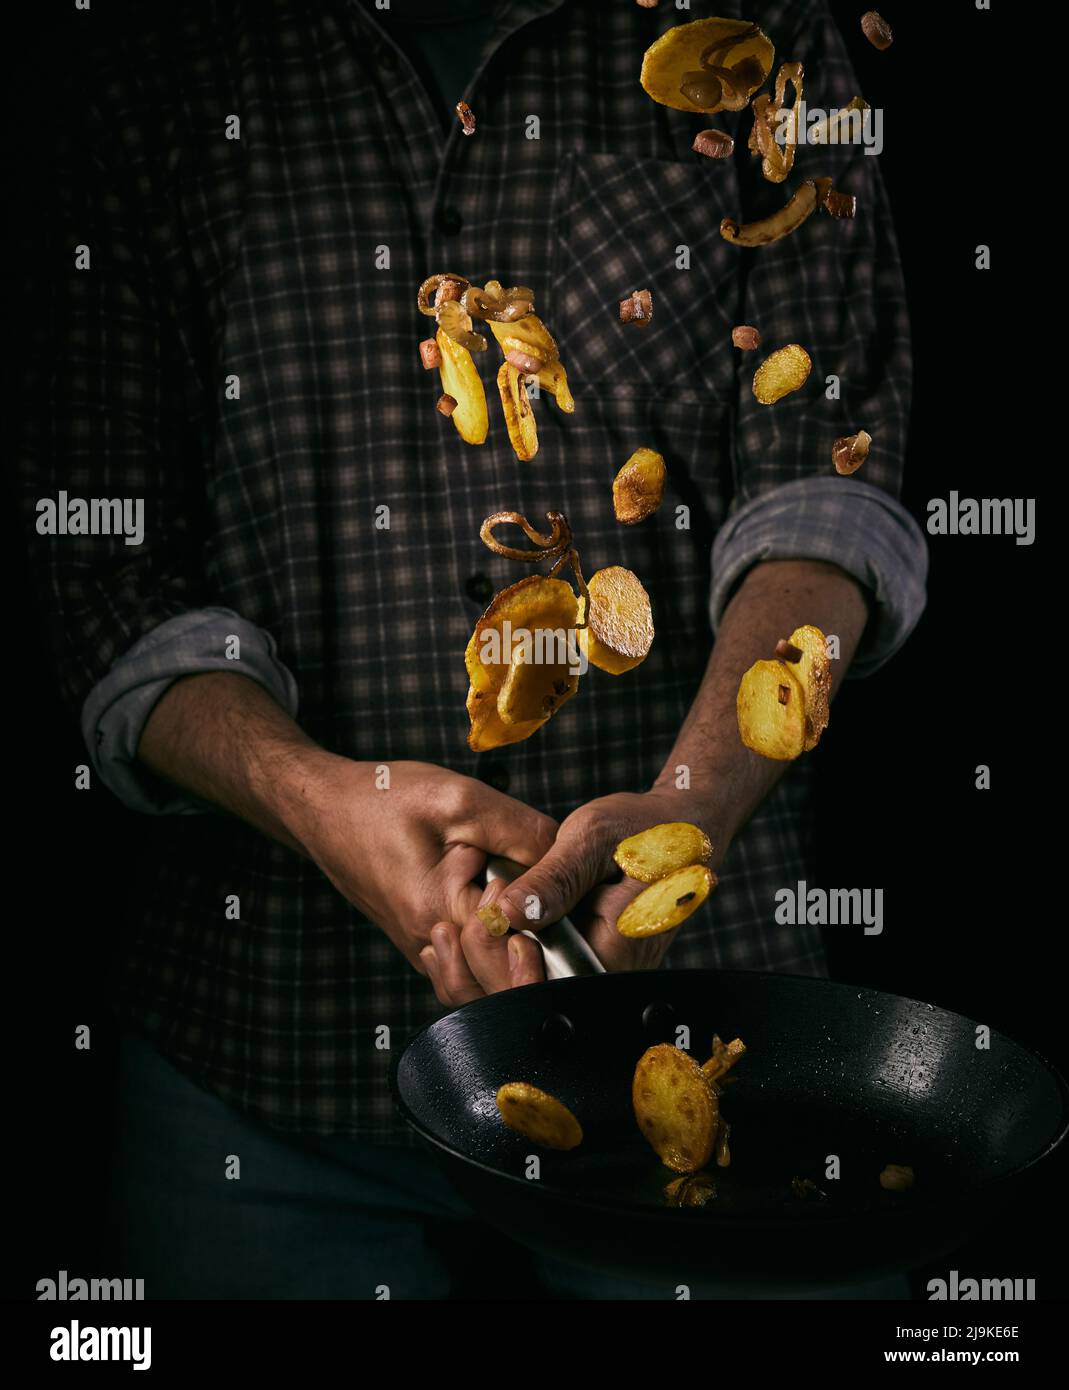 German Bratkartoffeln or fried potatoes throwing trough the air from kitchen chief on black background Stock Photo